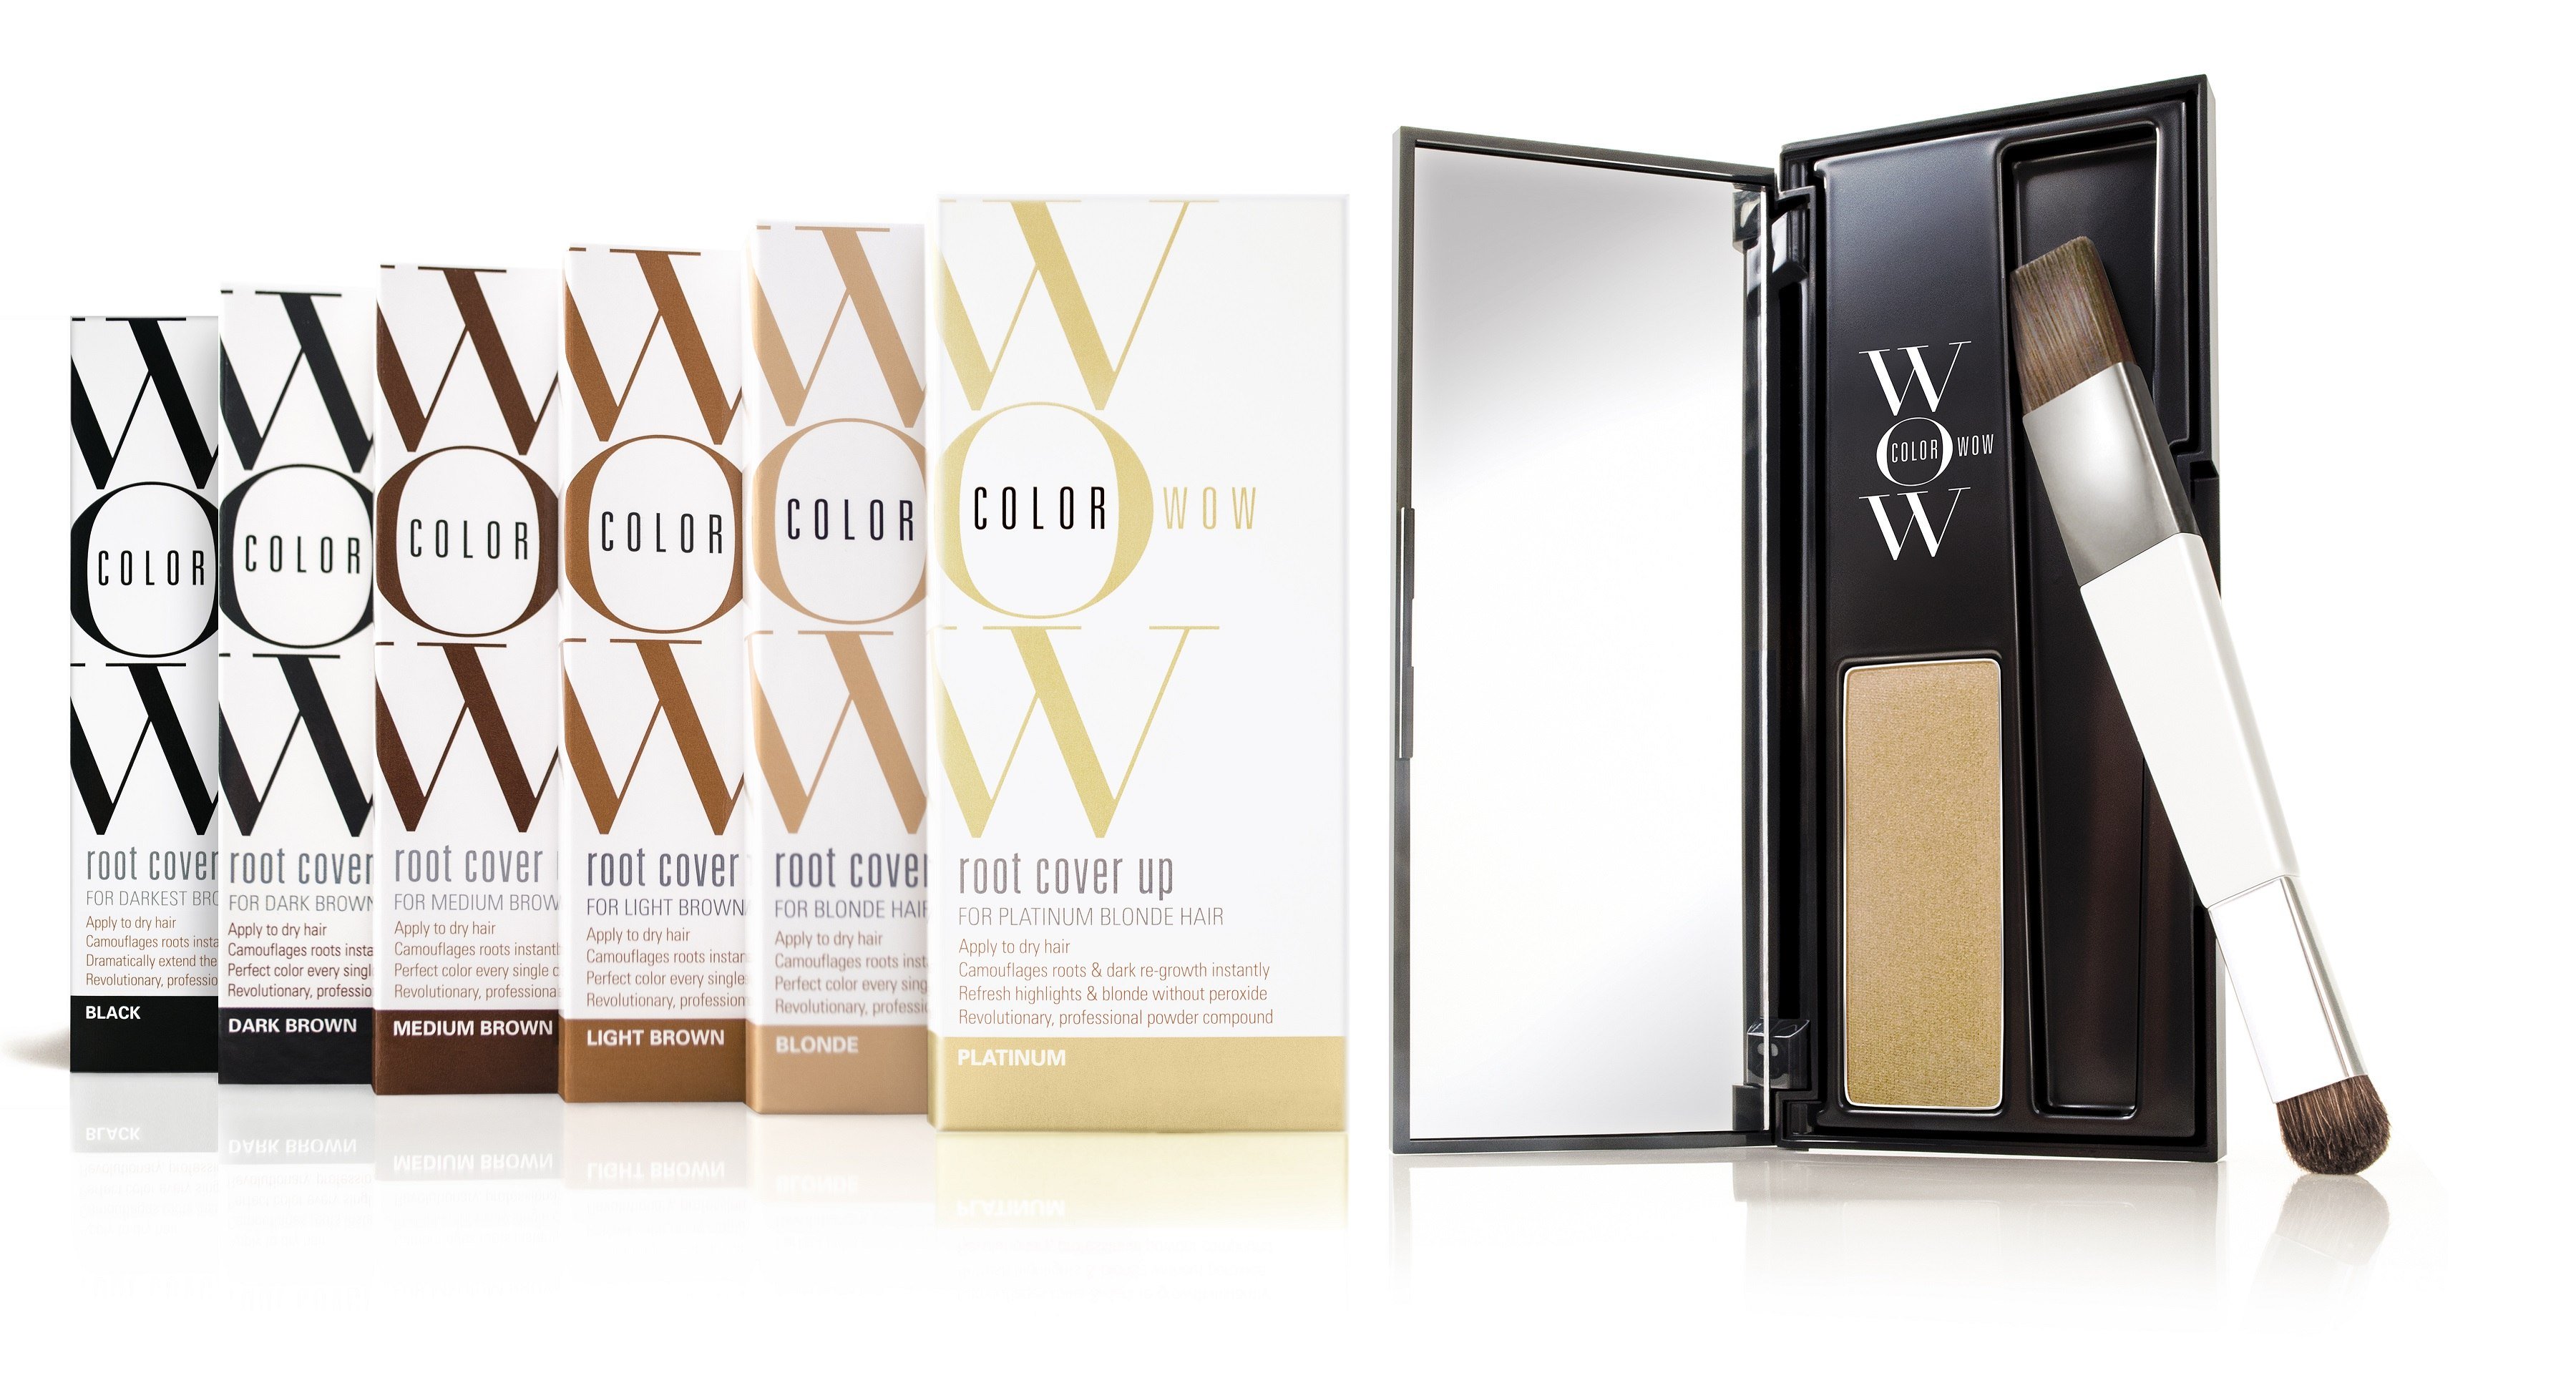 Color WOW Root Cover Up at Salon-M!